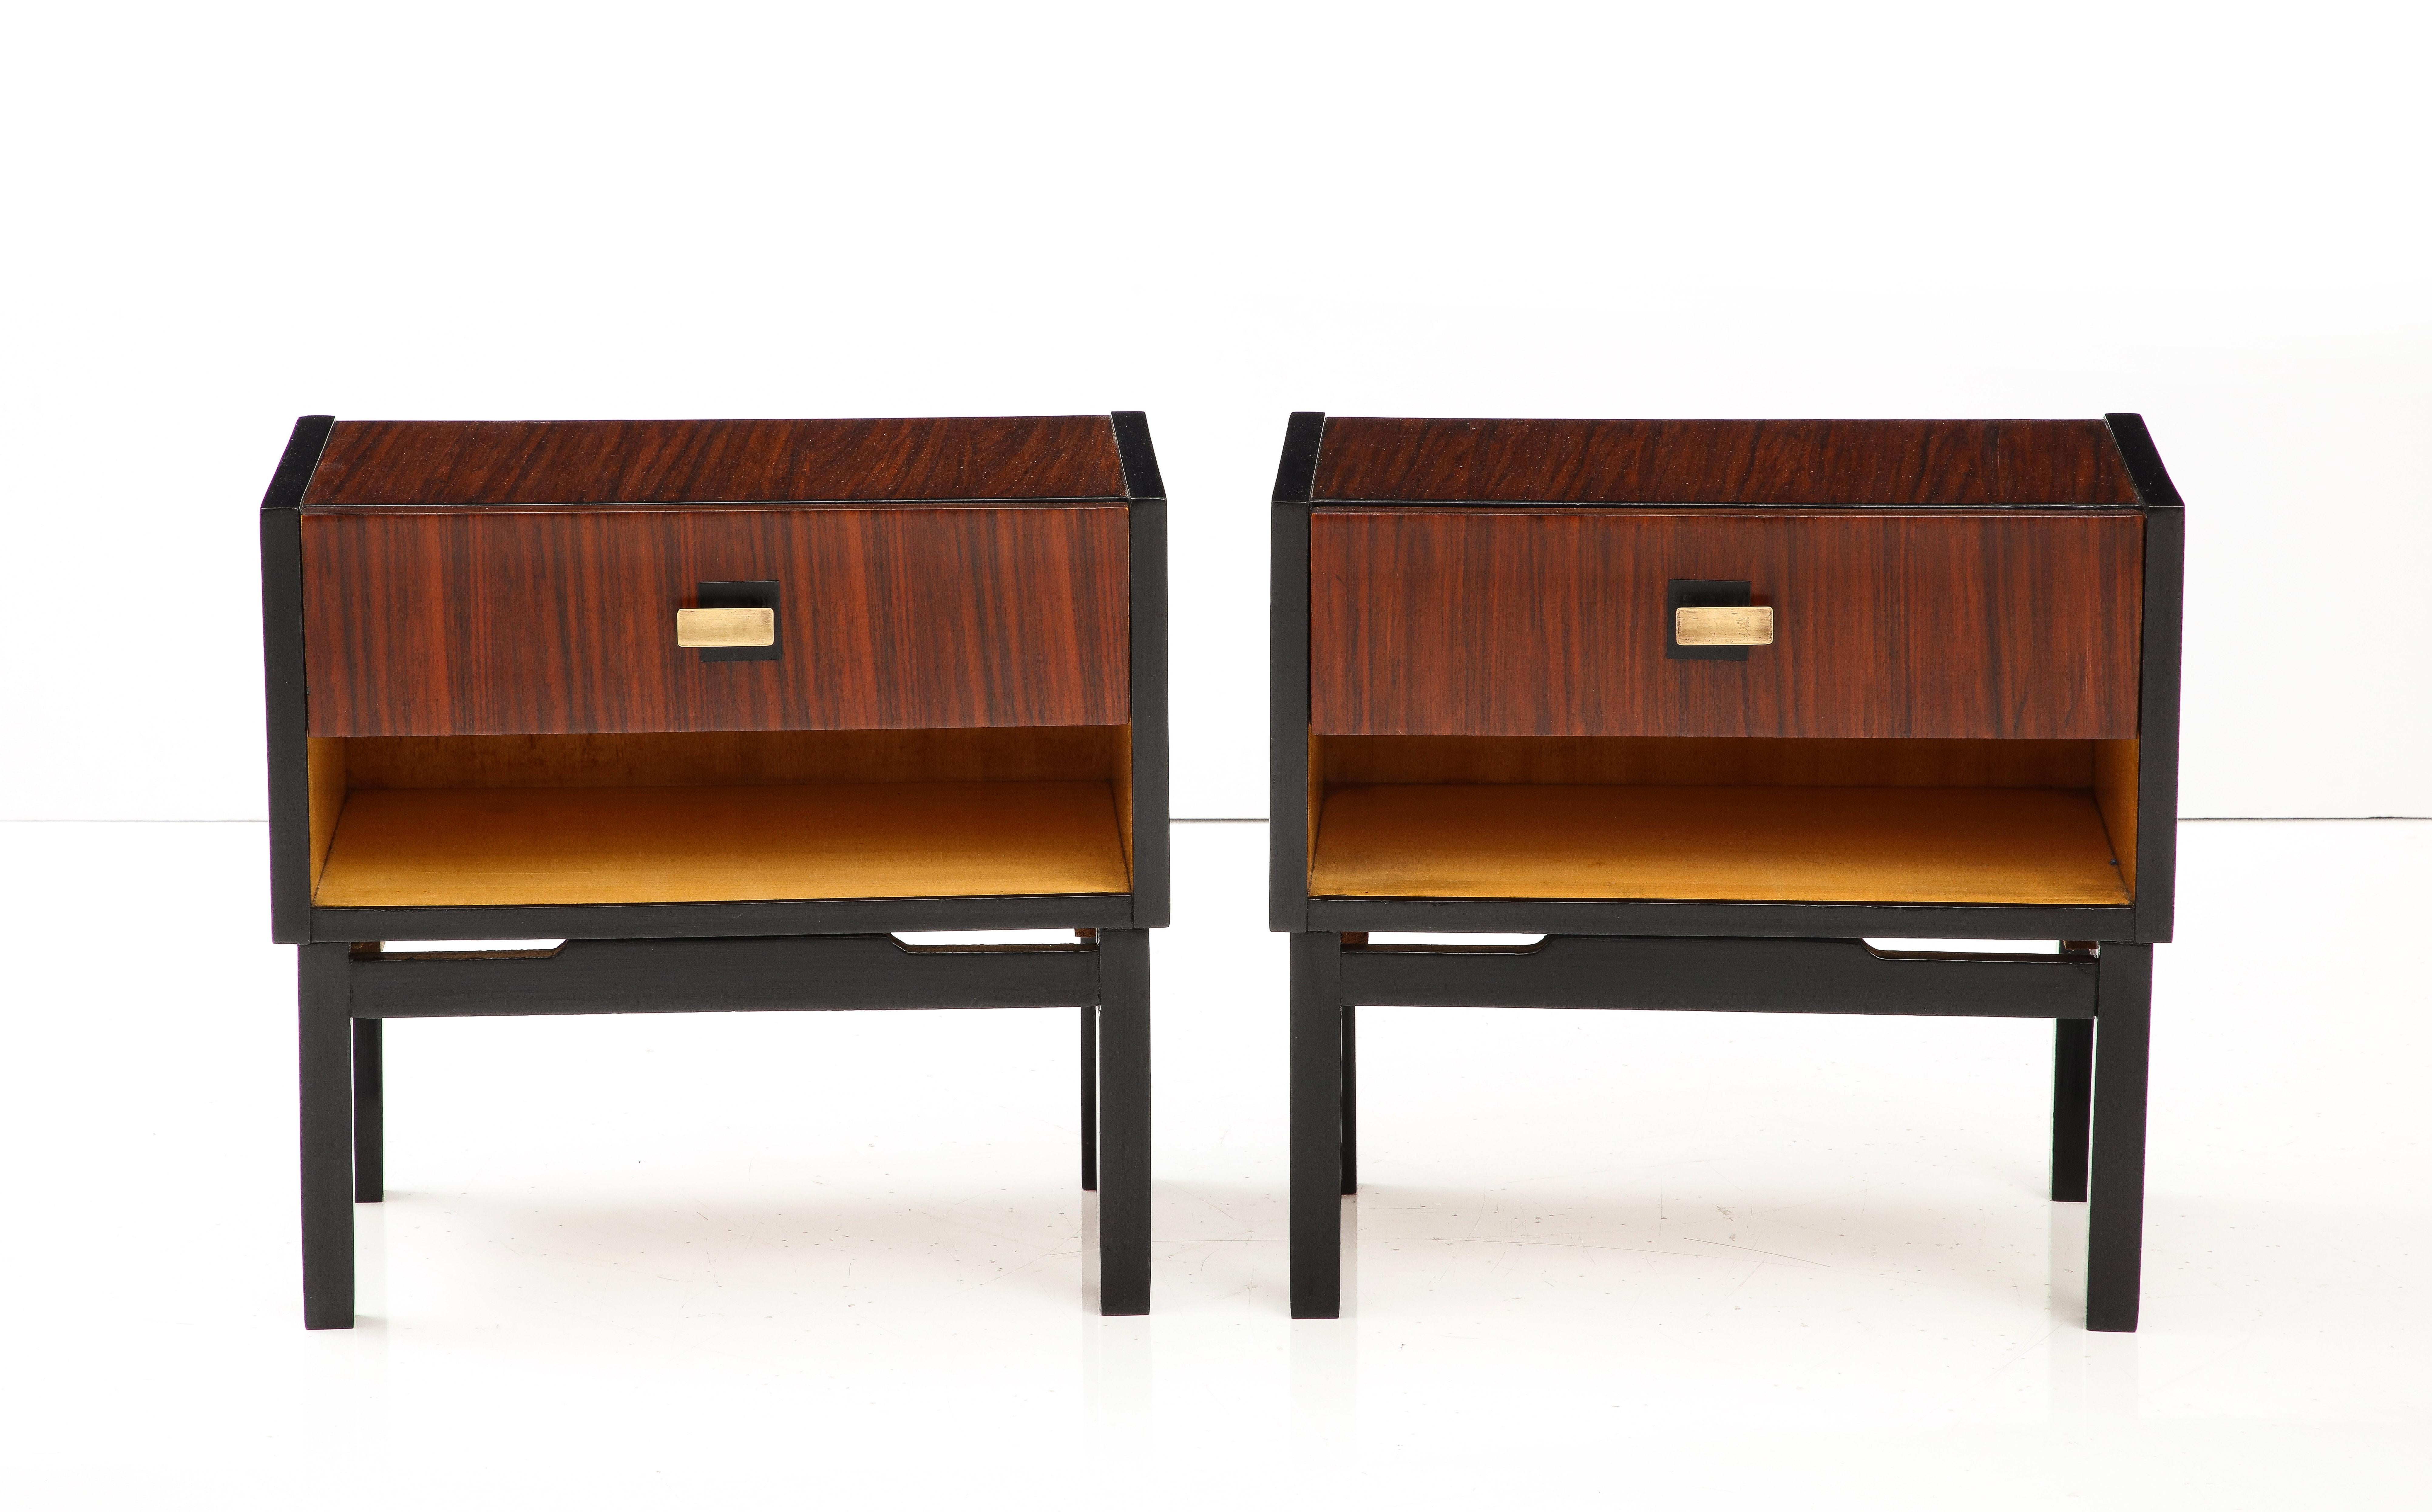 A fine pair of Italian macassar ebony bedside cabinets or end tables. The surface and sides are covered in a macassar ebony veneer and supported on square lacquered and ebonized legs. With one single drawer, featuring elegantly shaped brass handles